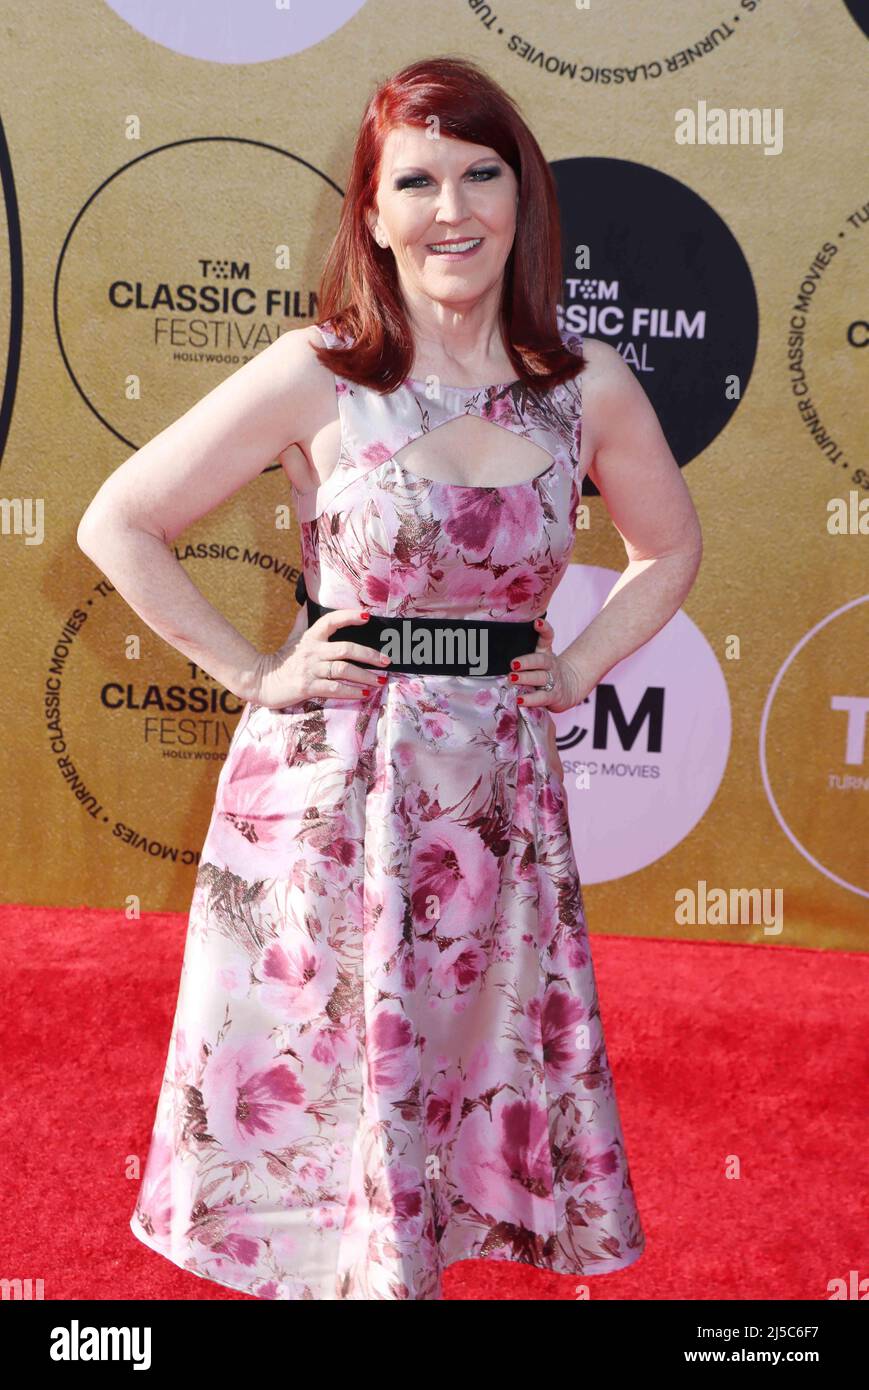 Los Angeles, USA. 21st Apr, 2022. Kate Flannery 2022/04/21 The 40th Anniversary Screening of “E.T. the Extra-Terrestrial” held at TCL Chinese Theatre in Hollywood, CA, Credit: Cronos/Alamy Live News Stock Photo